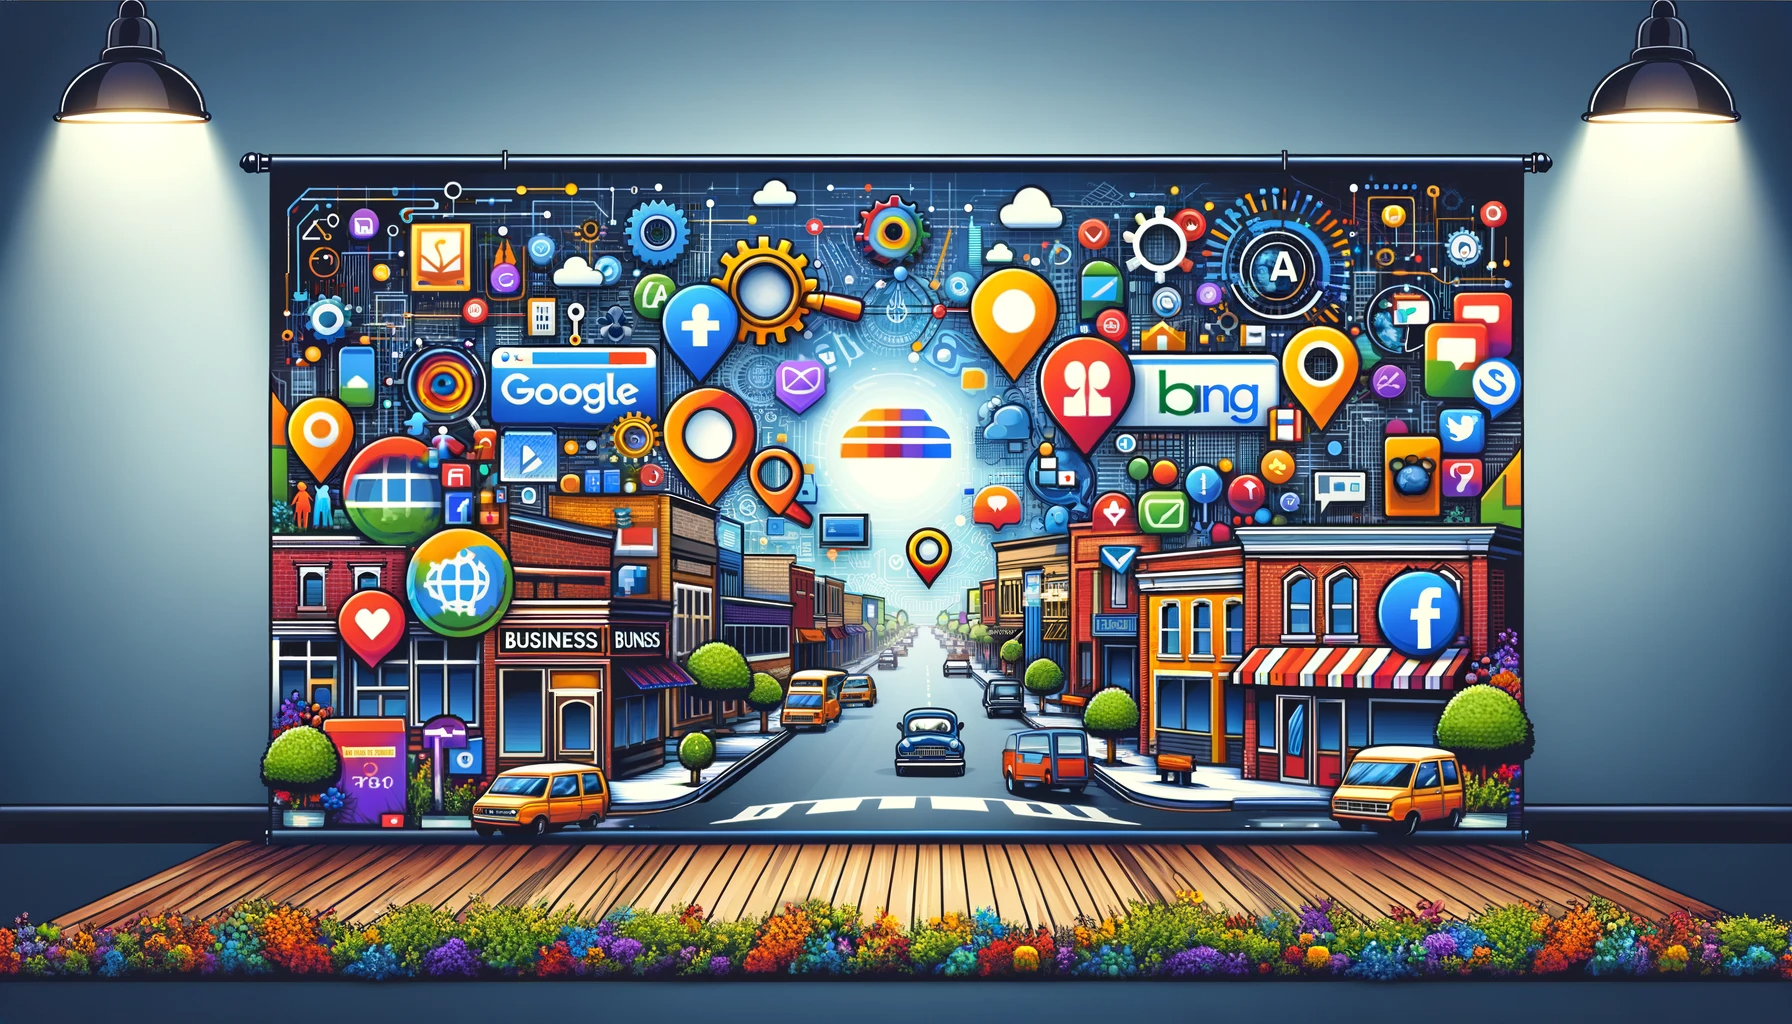 A wide banner featuring a collage of digital symbols representing local business listings on platforms like Google, Bing, and Yahoo, intertwined with social media icons for Facebook, Instagram, and LinkedIn. The background showcases elements of a local community, including a small town skyline and a community bulletin board, symbolizing the blend of digital and local community engagement for business visibility.